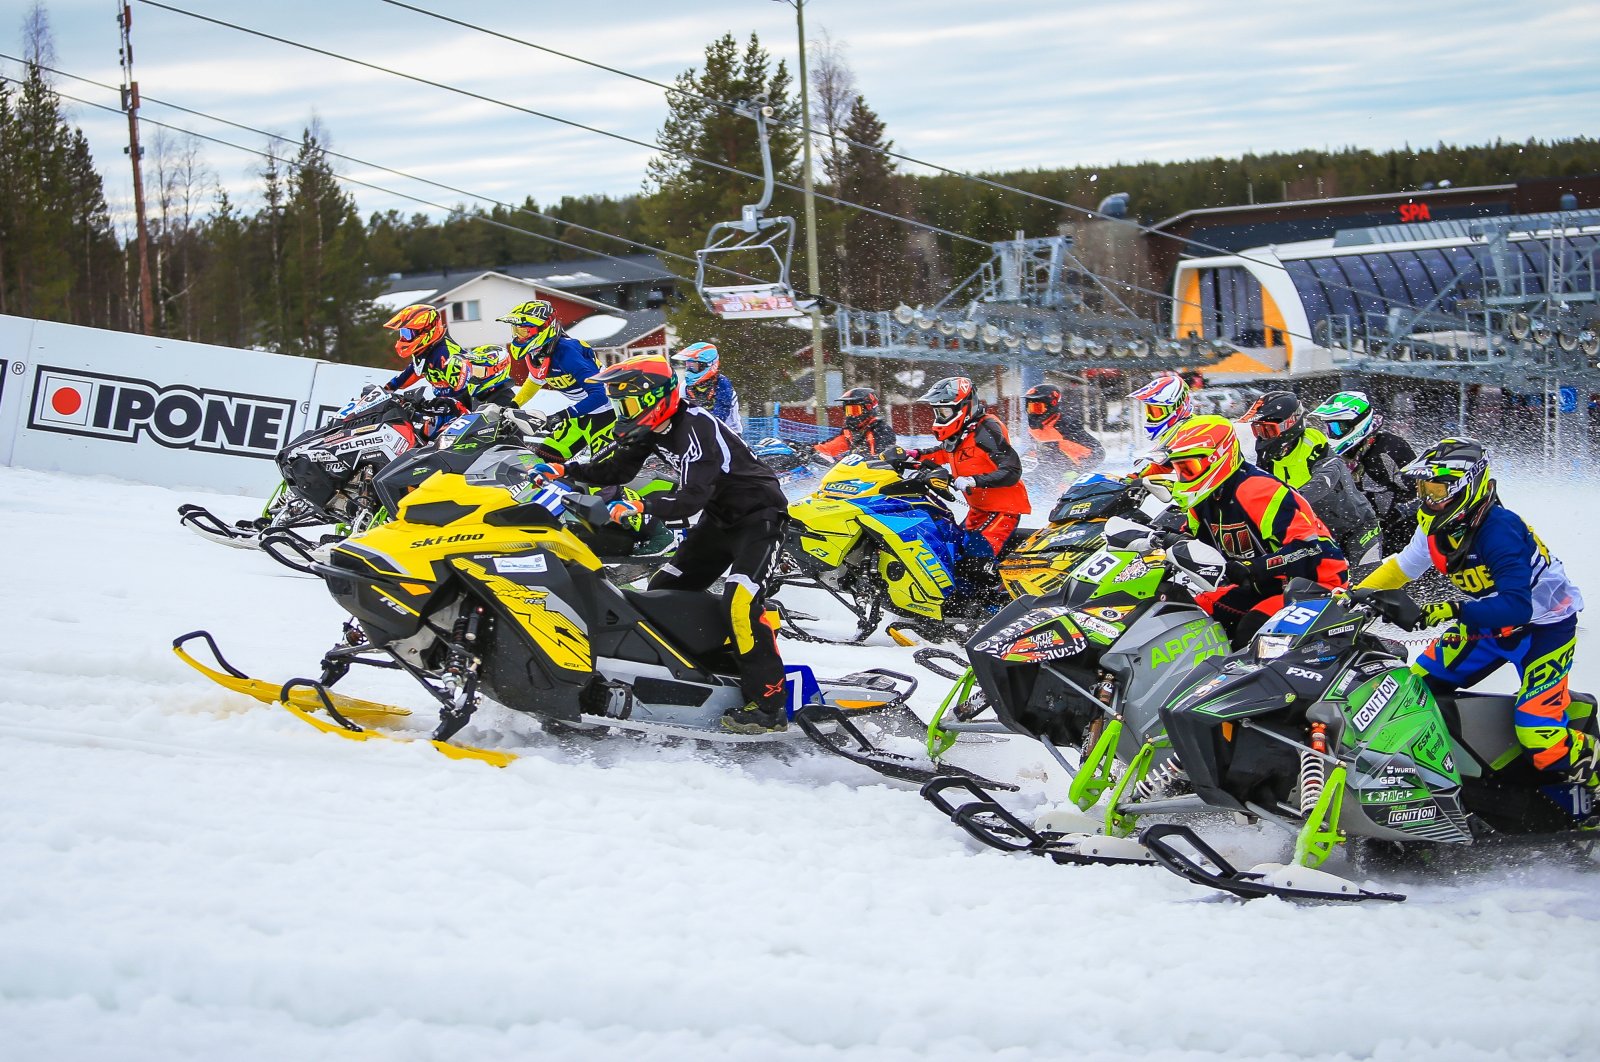 Racers compete at the SNX Finland snowcross event, Kittila, Finland, May 3, 2018. (Courtesy of SNX Photos)